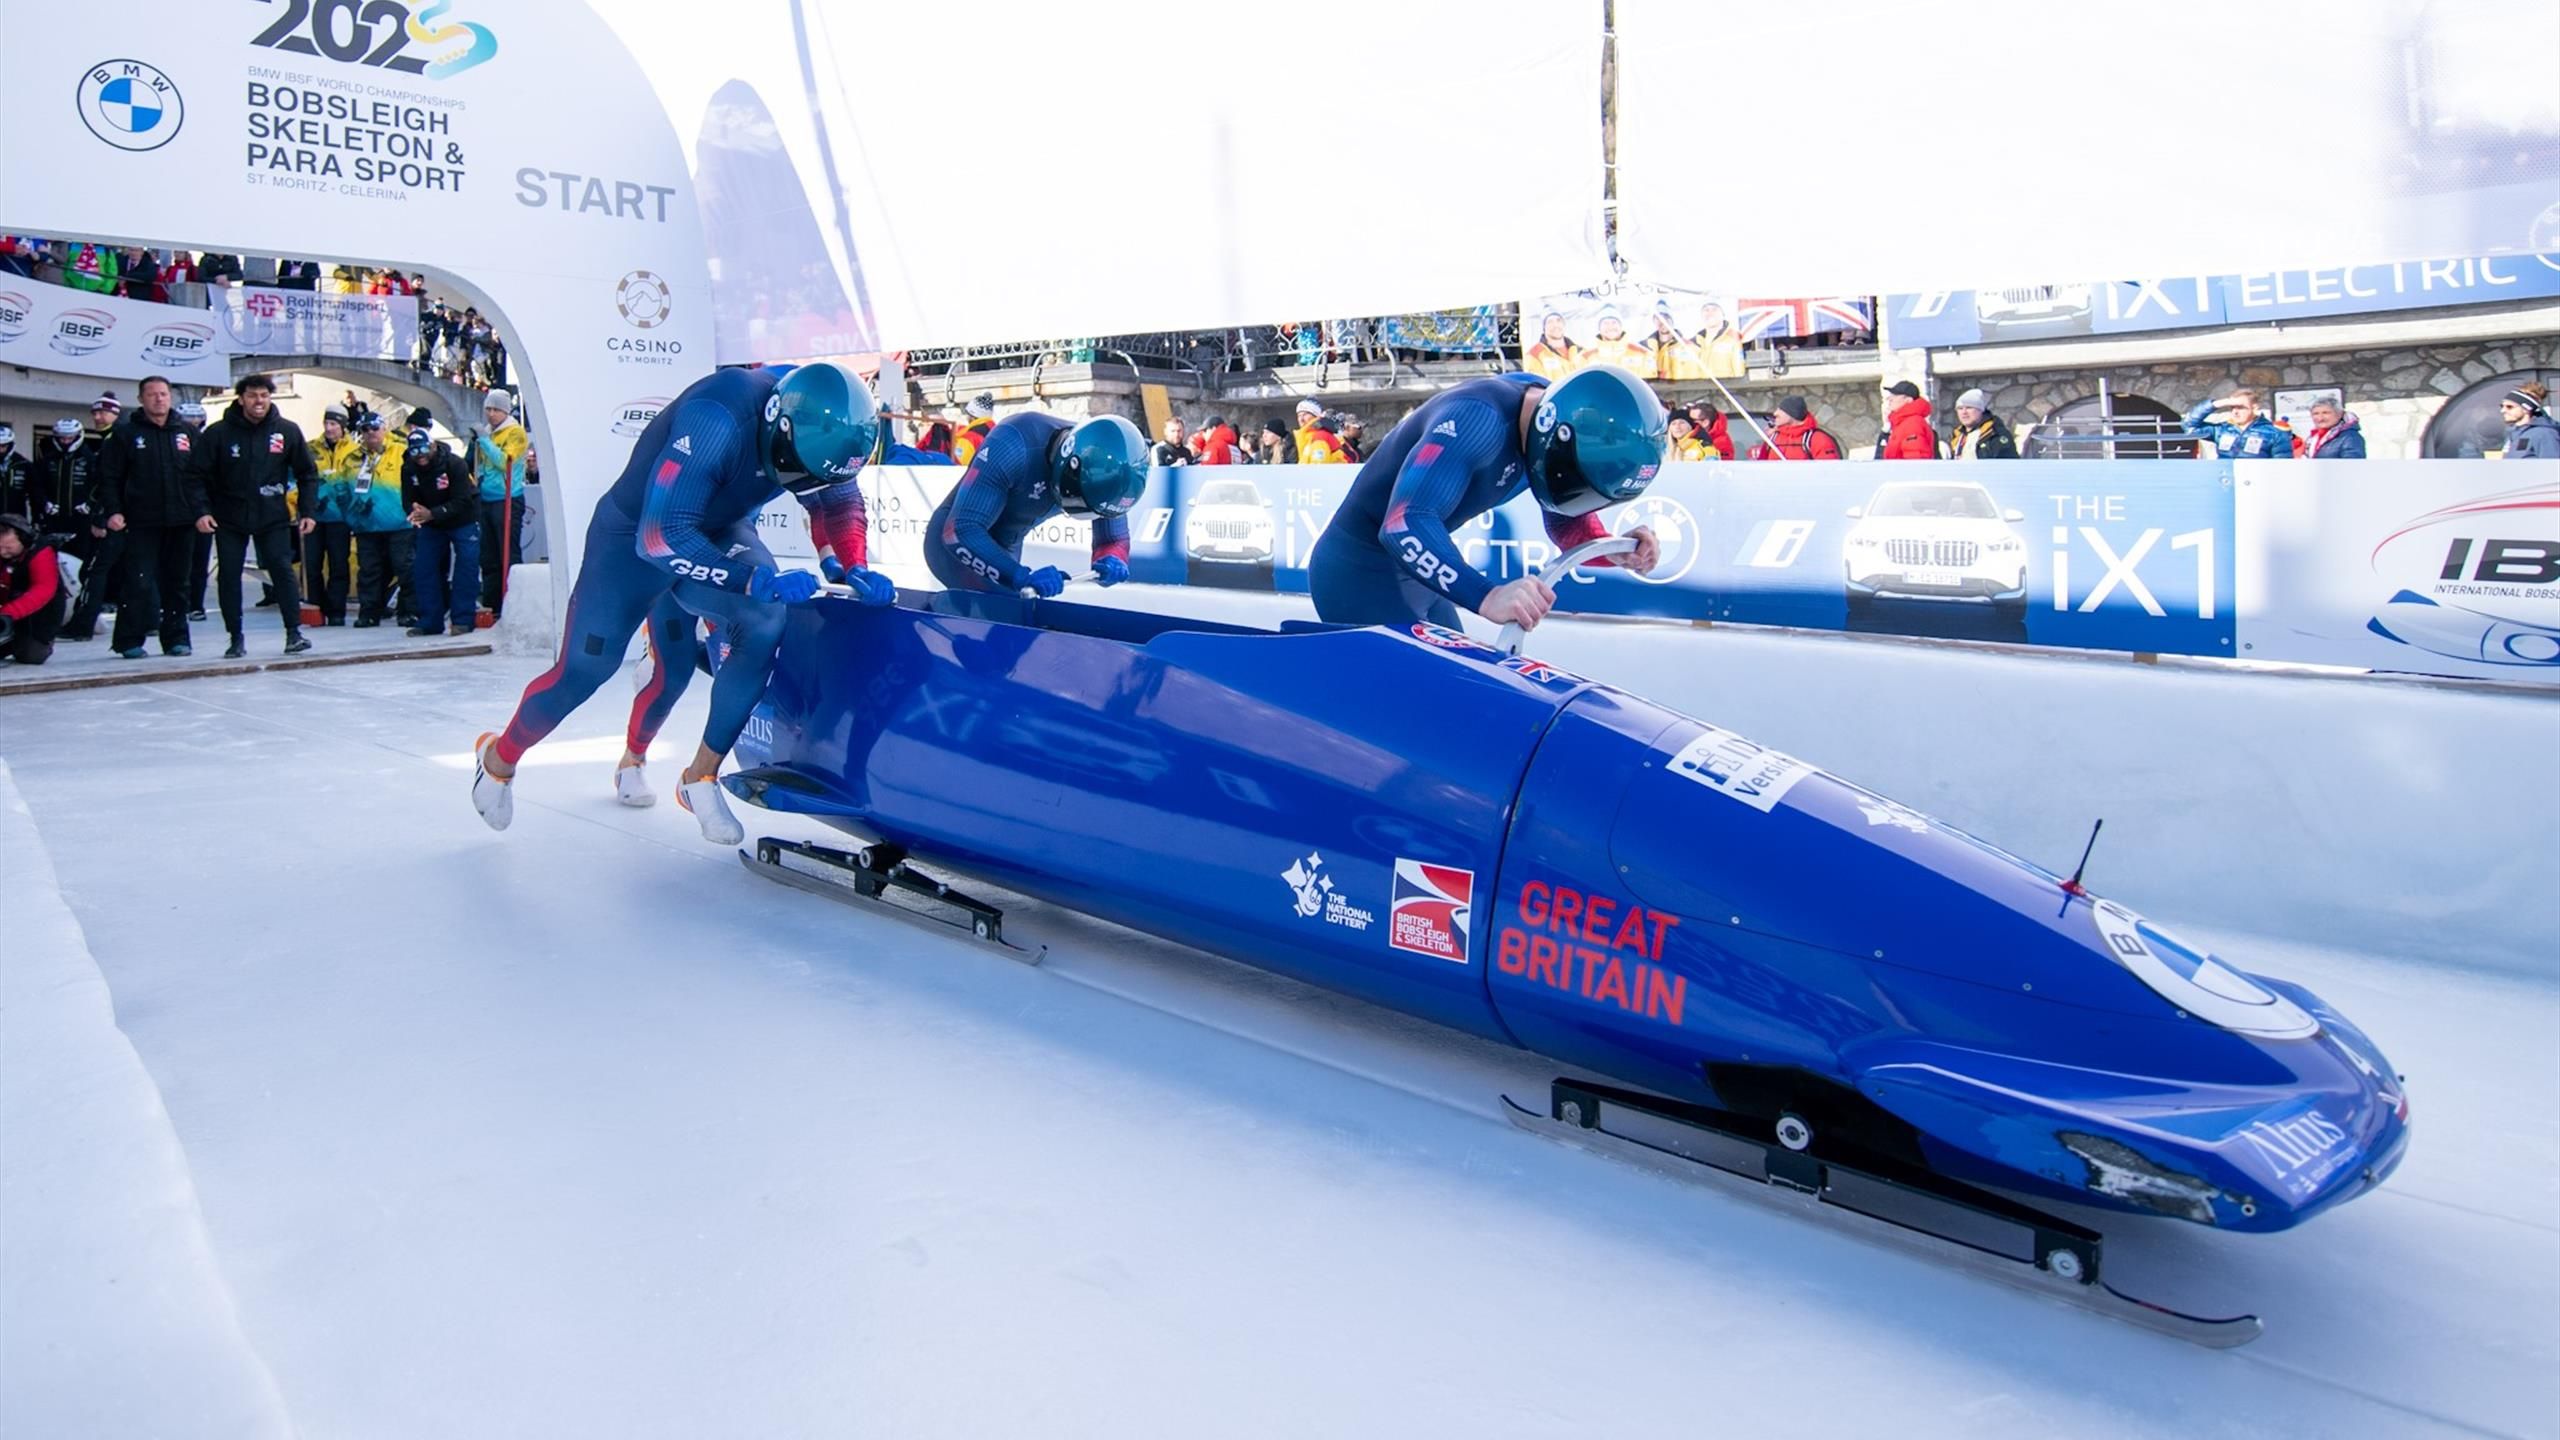 Great Britain Win First Four Man Bobsleigh Medal In 84 Years With World Championships Silver